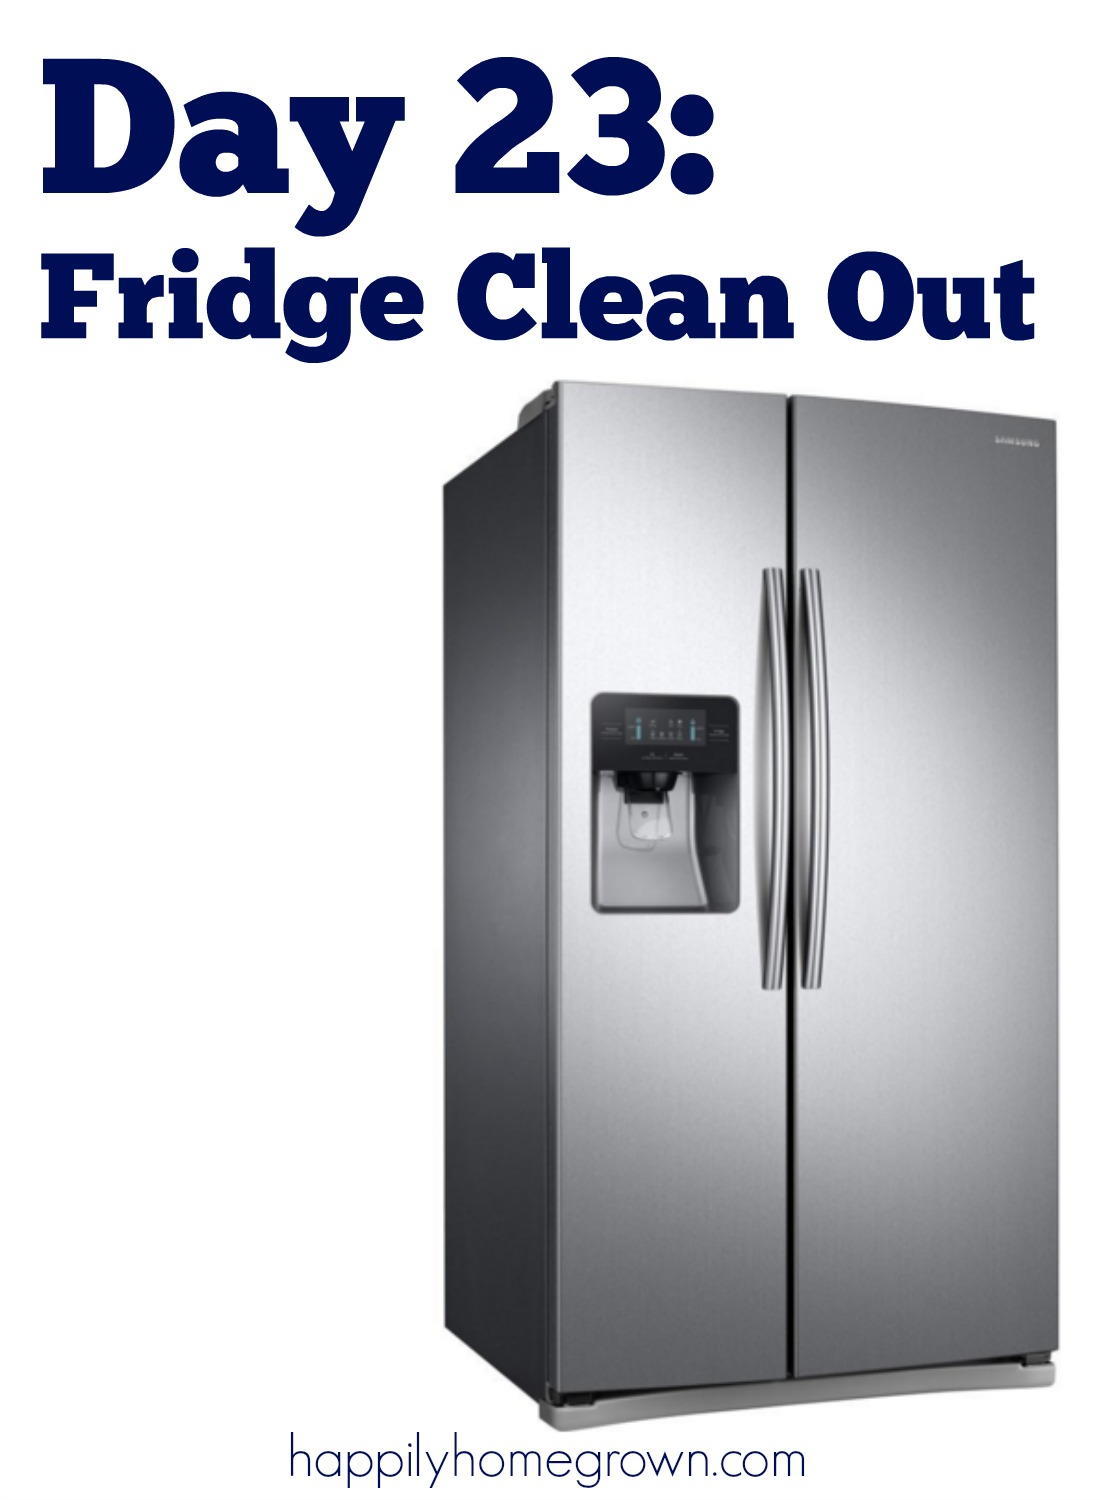 Fridge clean out is the chore we all know that we need to do, but none of us want to do. Here are a few tips to make it easier.